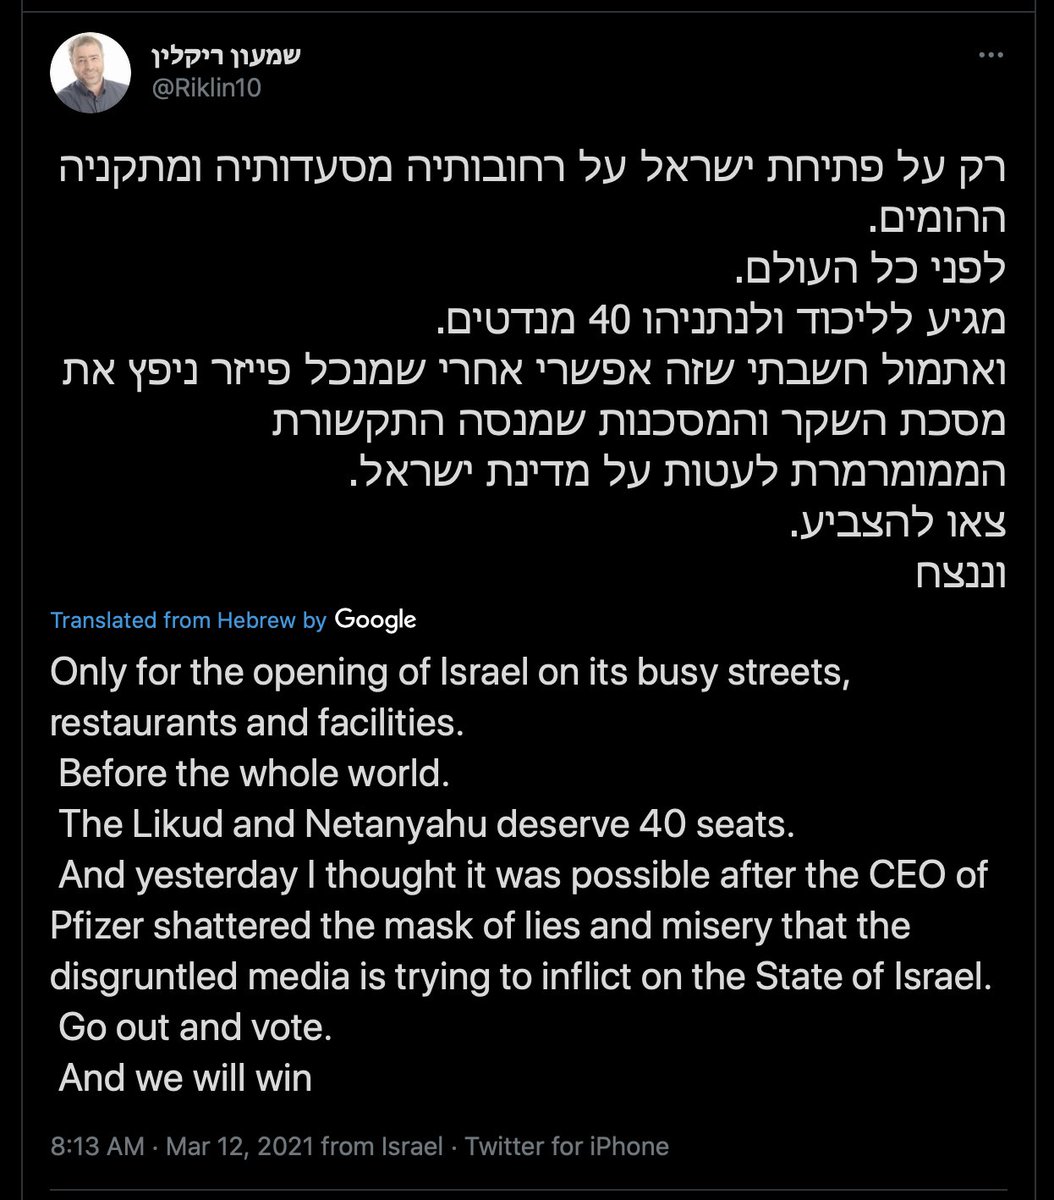 Israeli media propaganda machine. Withholding information about the world. Israel is the only country with a practical closed Airport due to Covid, and the media celebrate Israel as the first to open up.  #factoryoflies